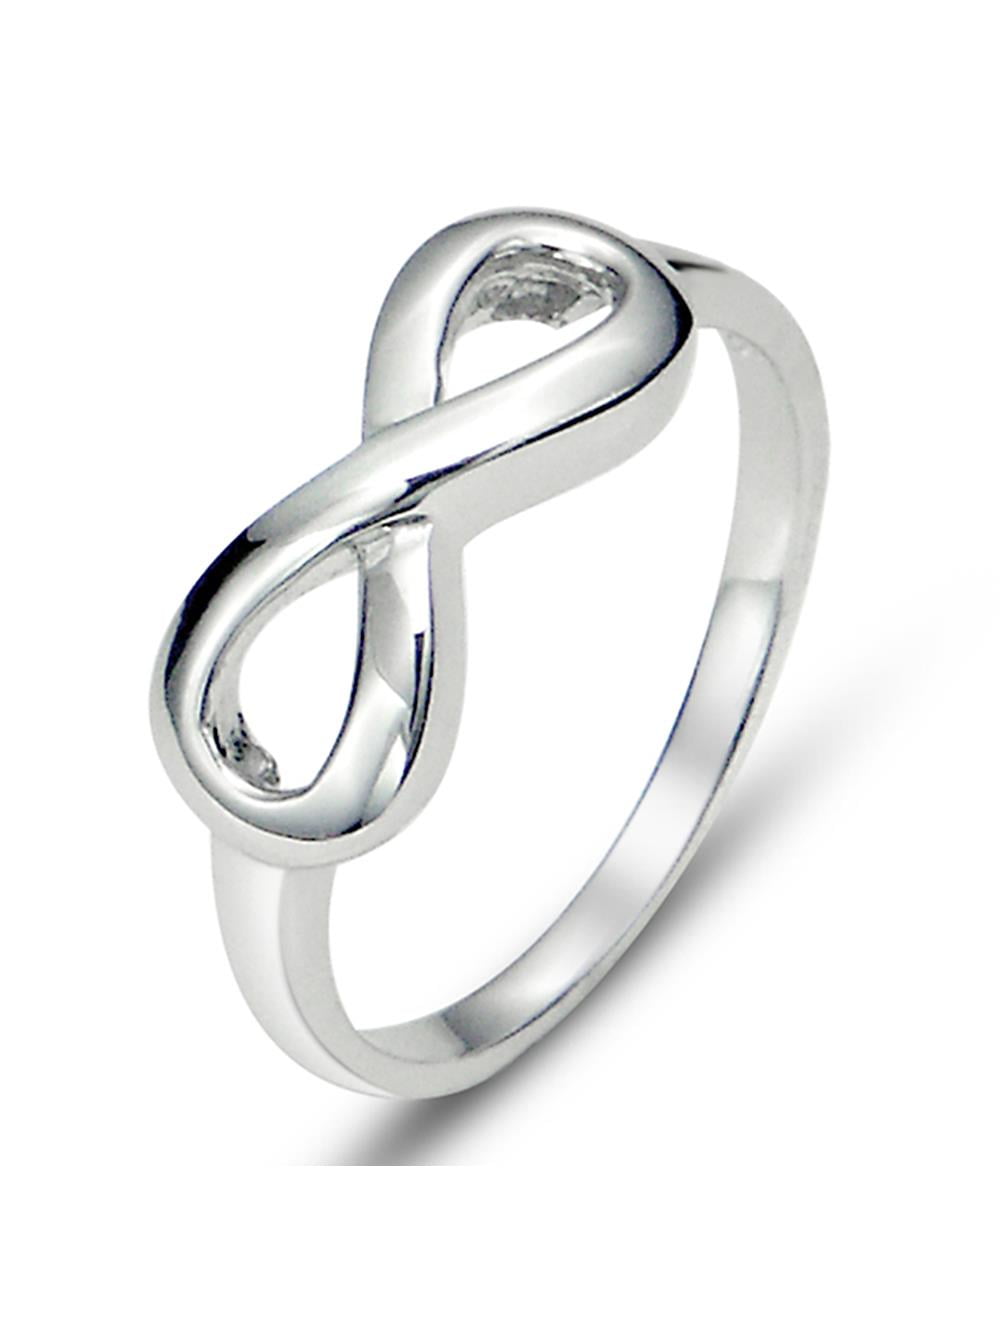 WithLoveSilver 925 Sterling Silver Infinity Symbol Wedding Band Ring Size 8, 9 